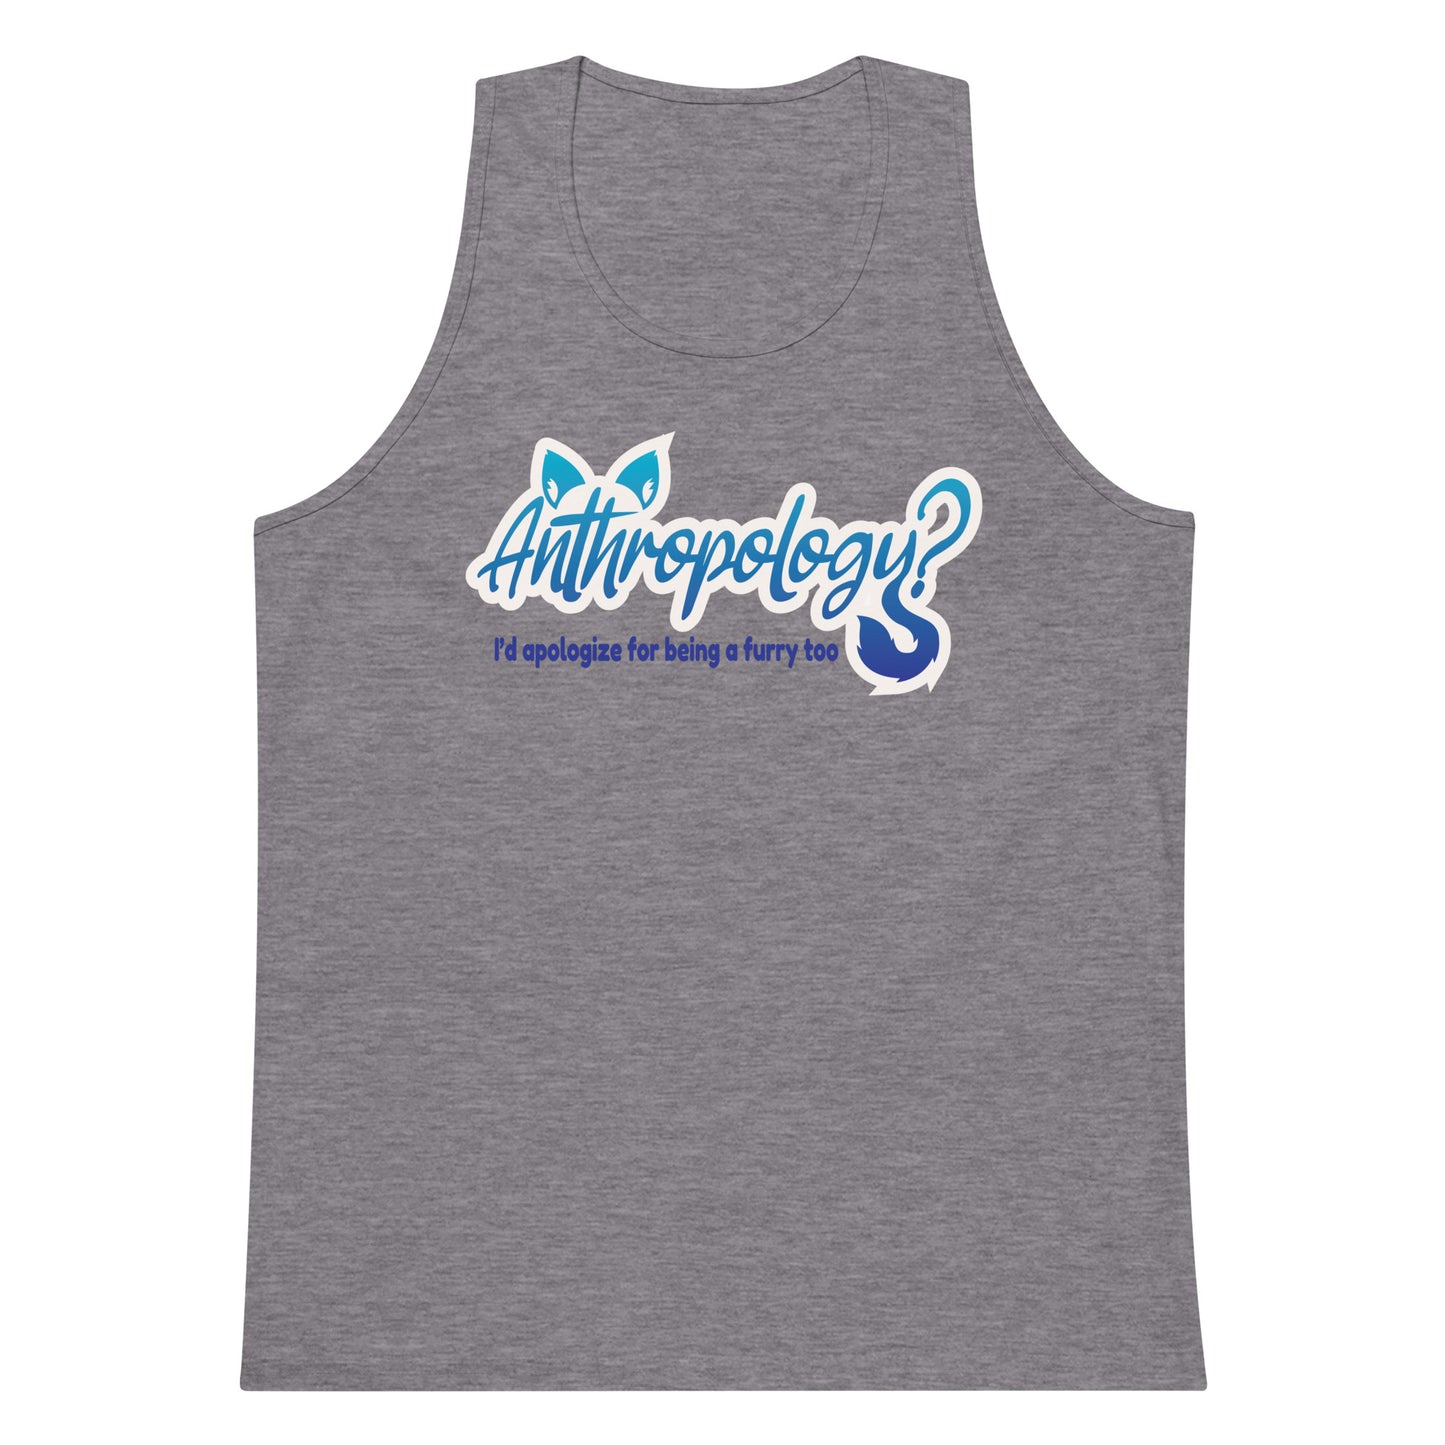 Anthropology? I'd Apologize Too (Furry) tank top